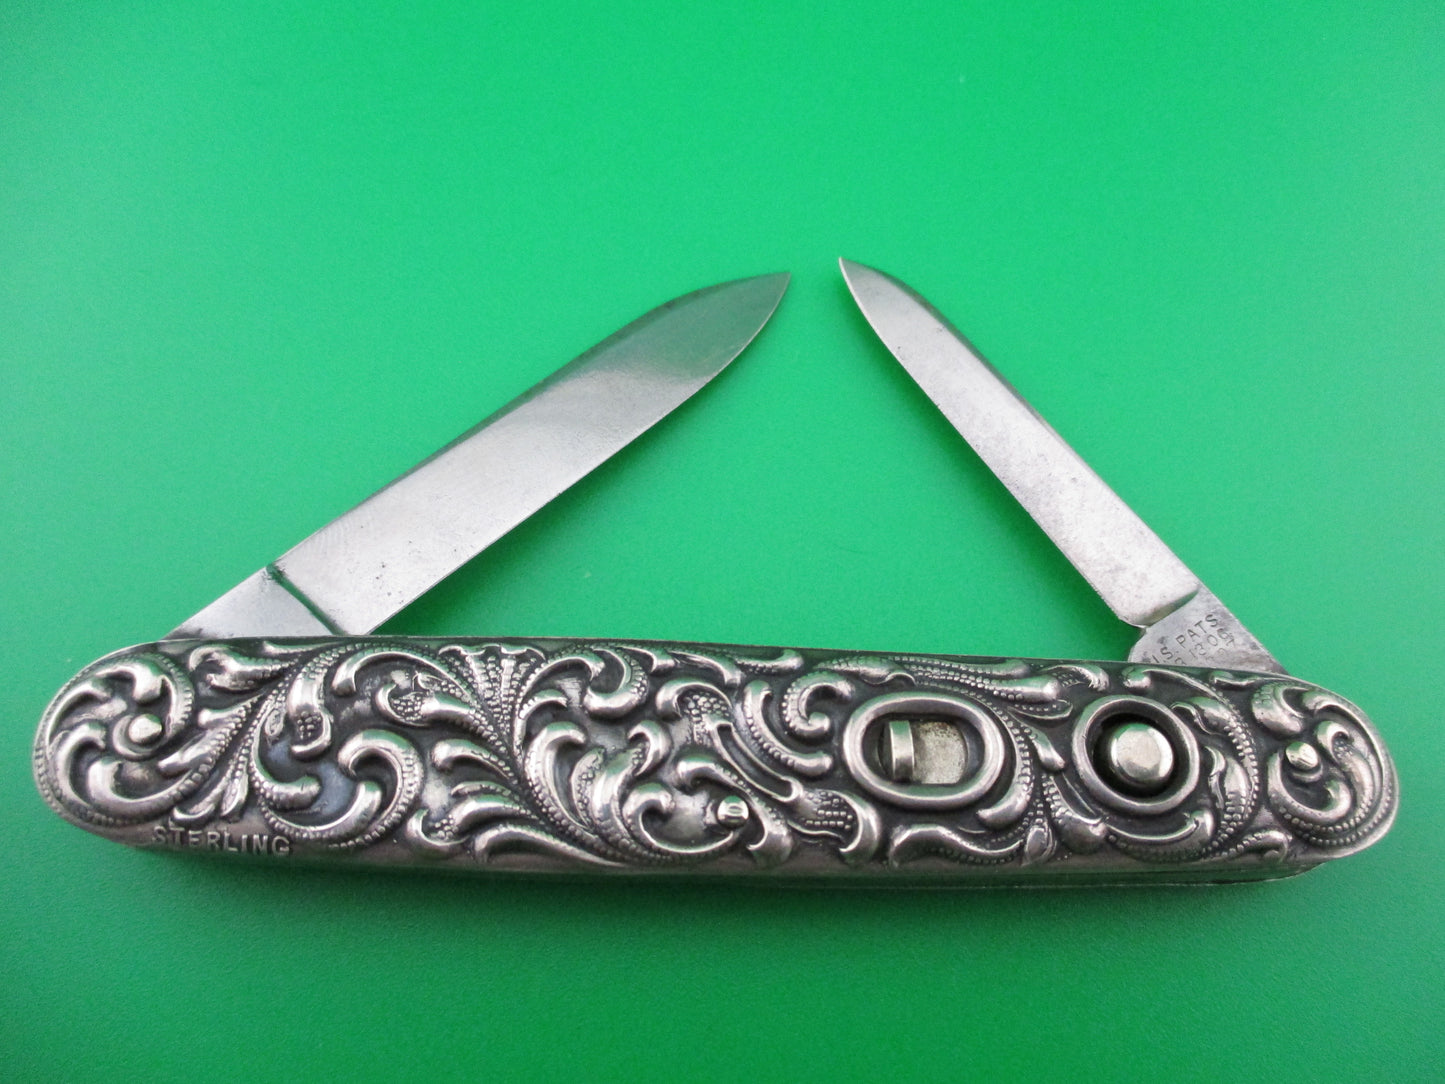 Schrade Cut Co 3 3/8 inch Sterling double scroll